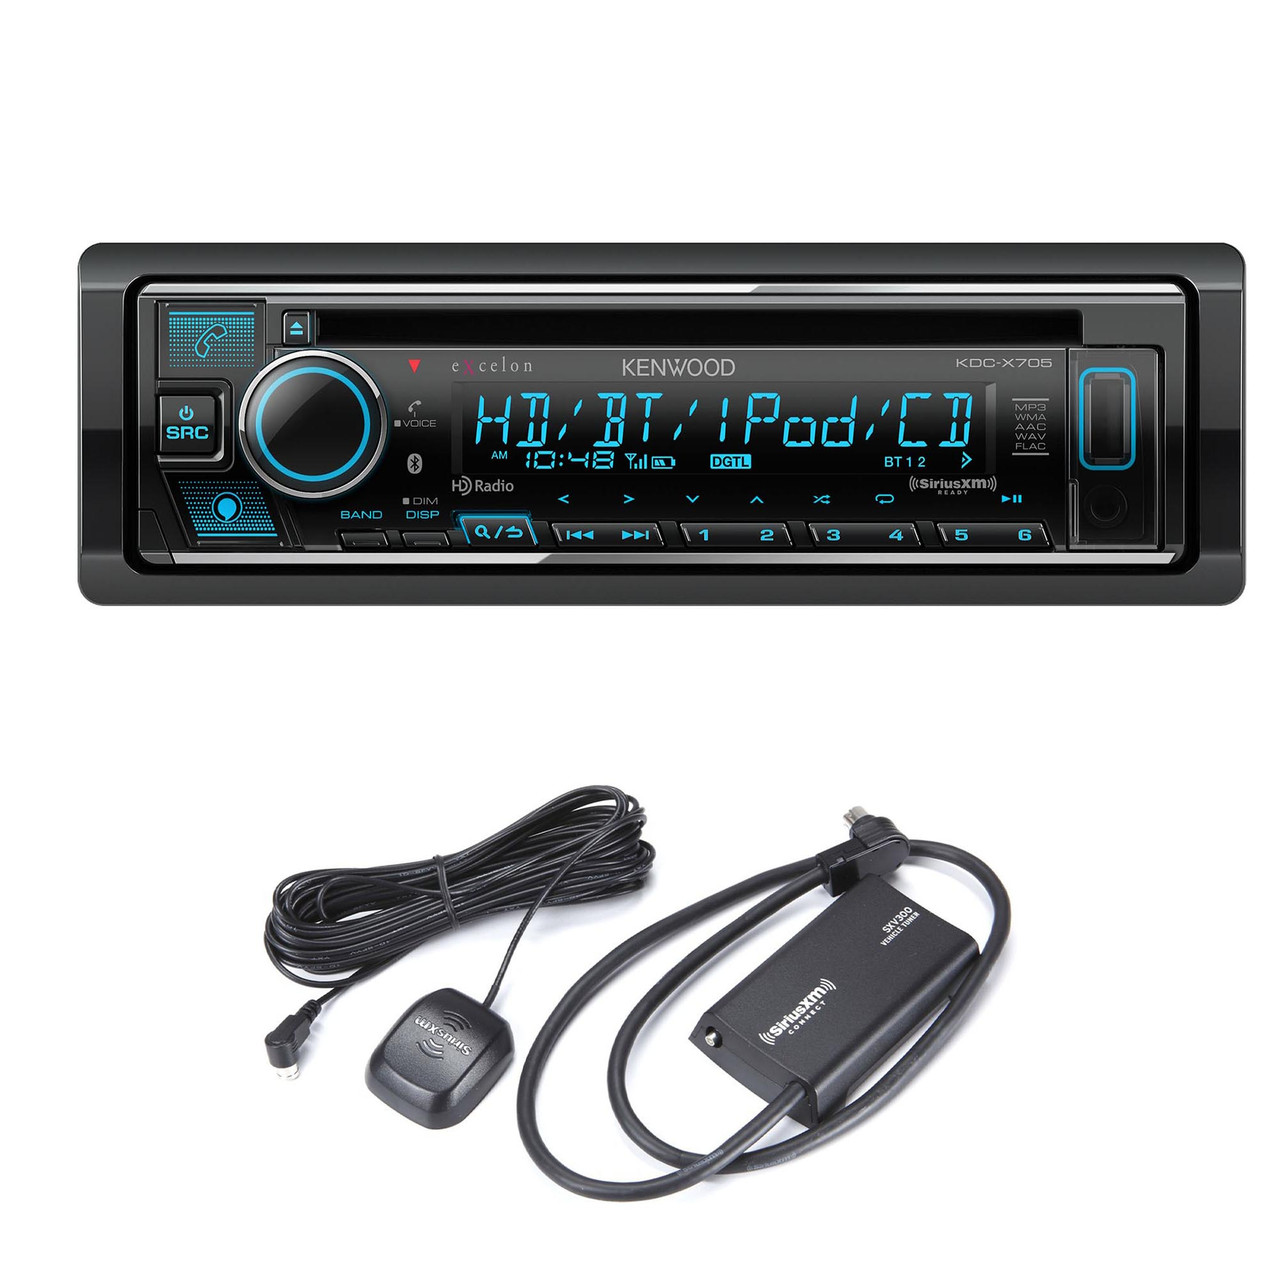 Kenwood eXcelon KDC-X705 Bluetooth HD radio Dual rear USB single DIN CD receiver with a Sirius XM Connect Vehicle Tuner Kit for Satellite Radio - Creative Audio